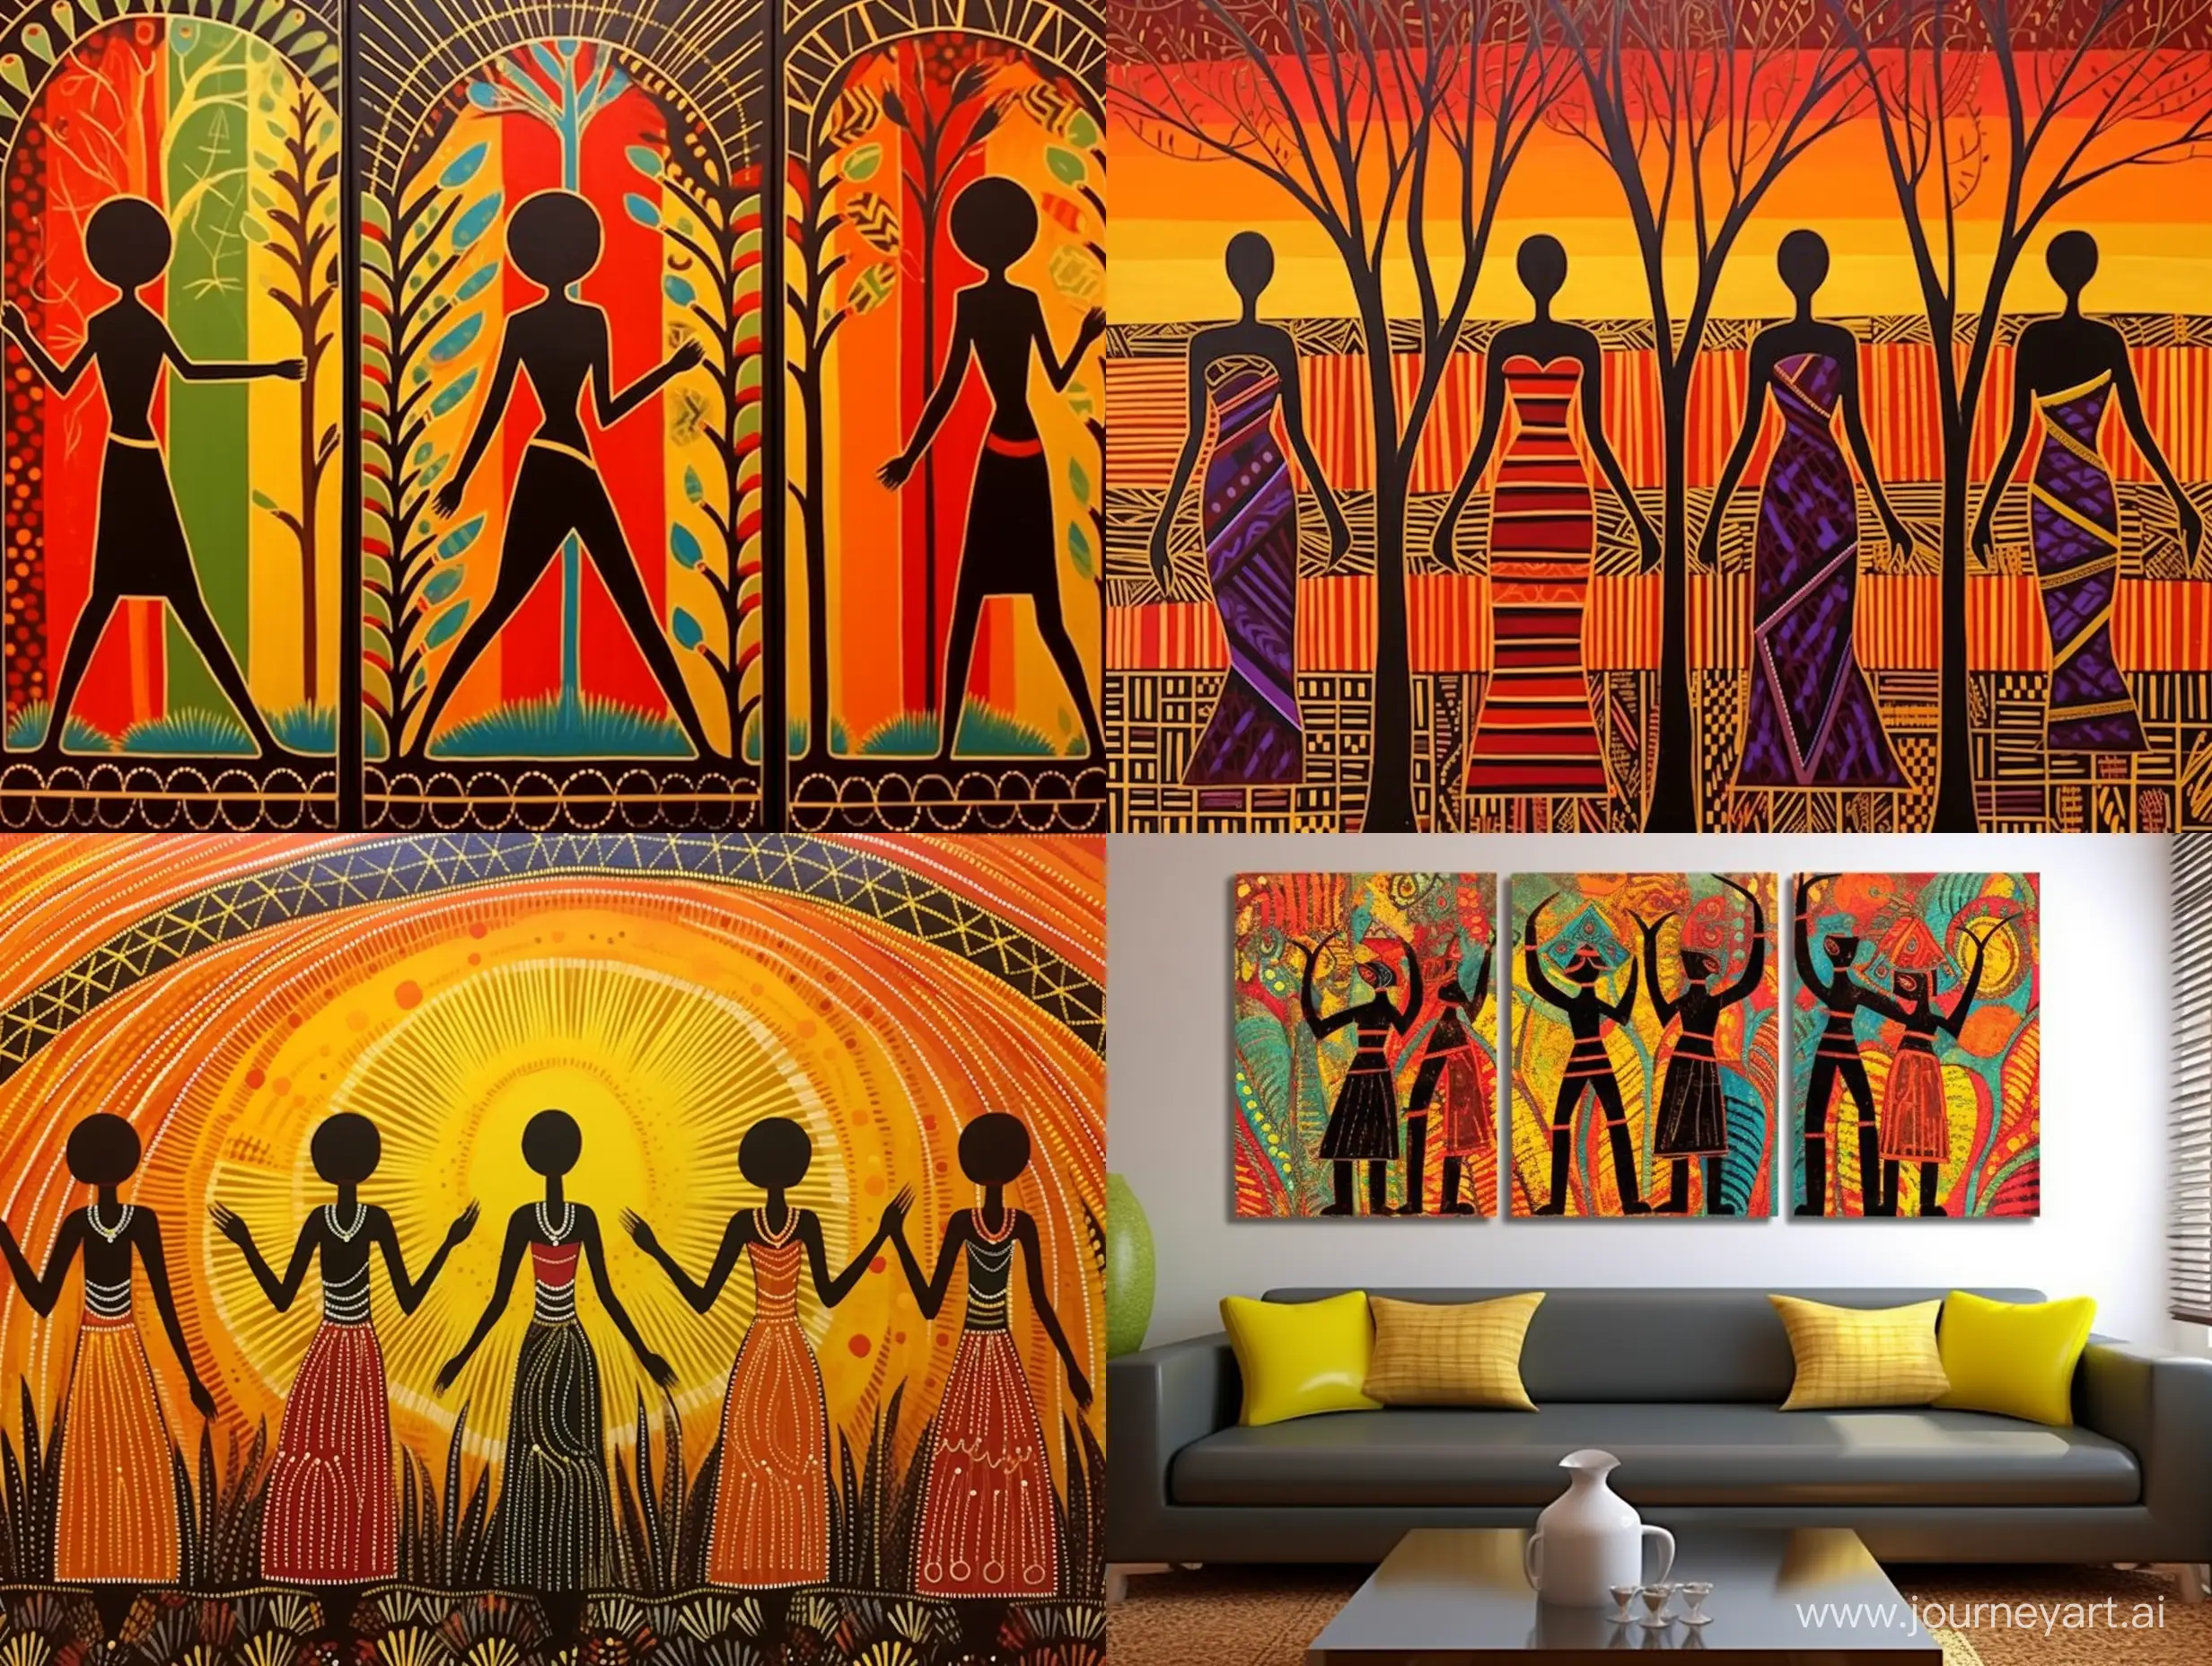 Ethnic-Dance-Celebration-Vibrant-Papuan-and-African-Mosaic-on-Graphic-Canvas